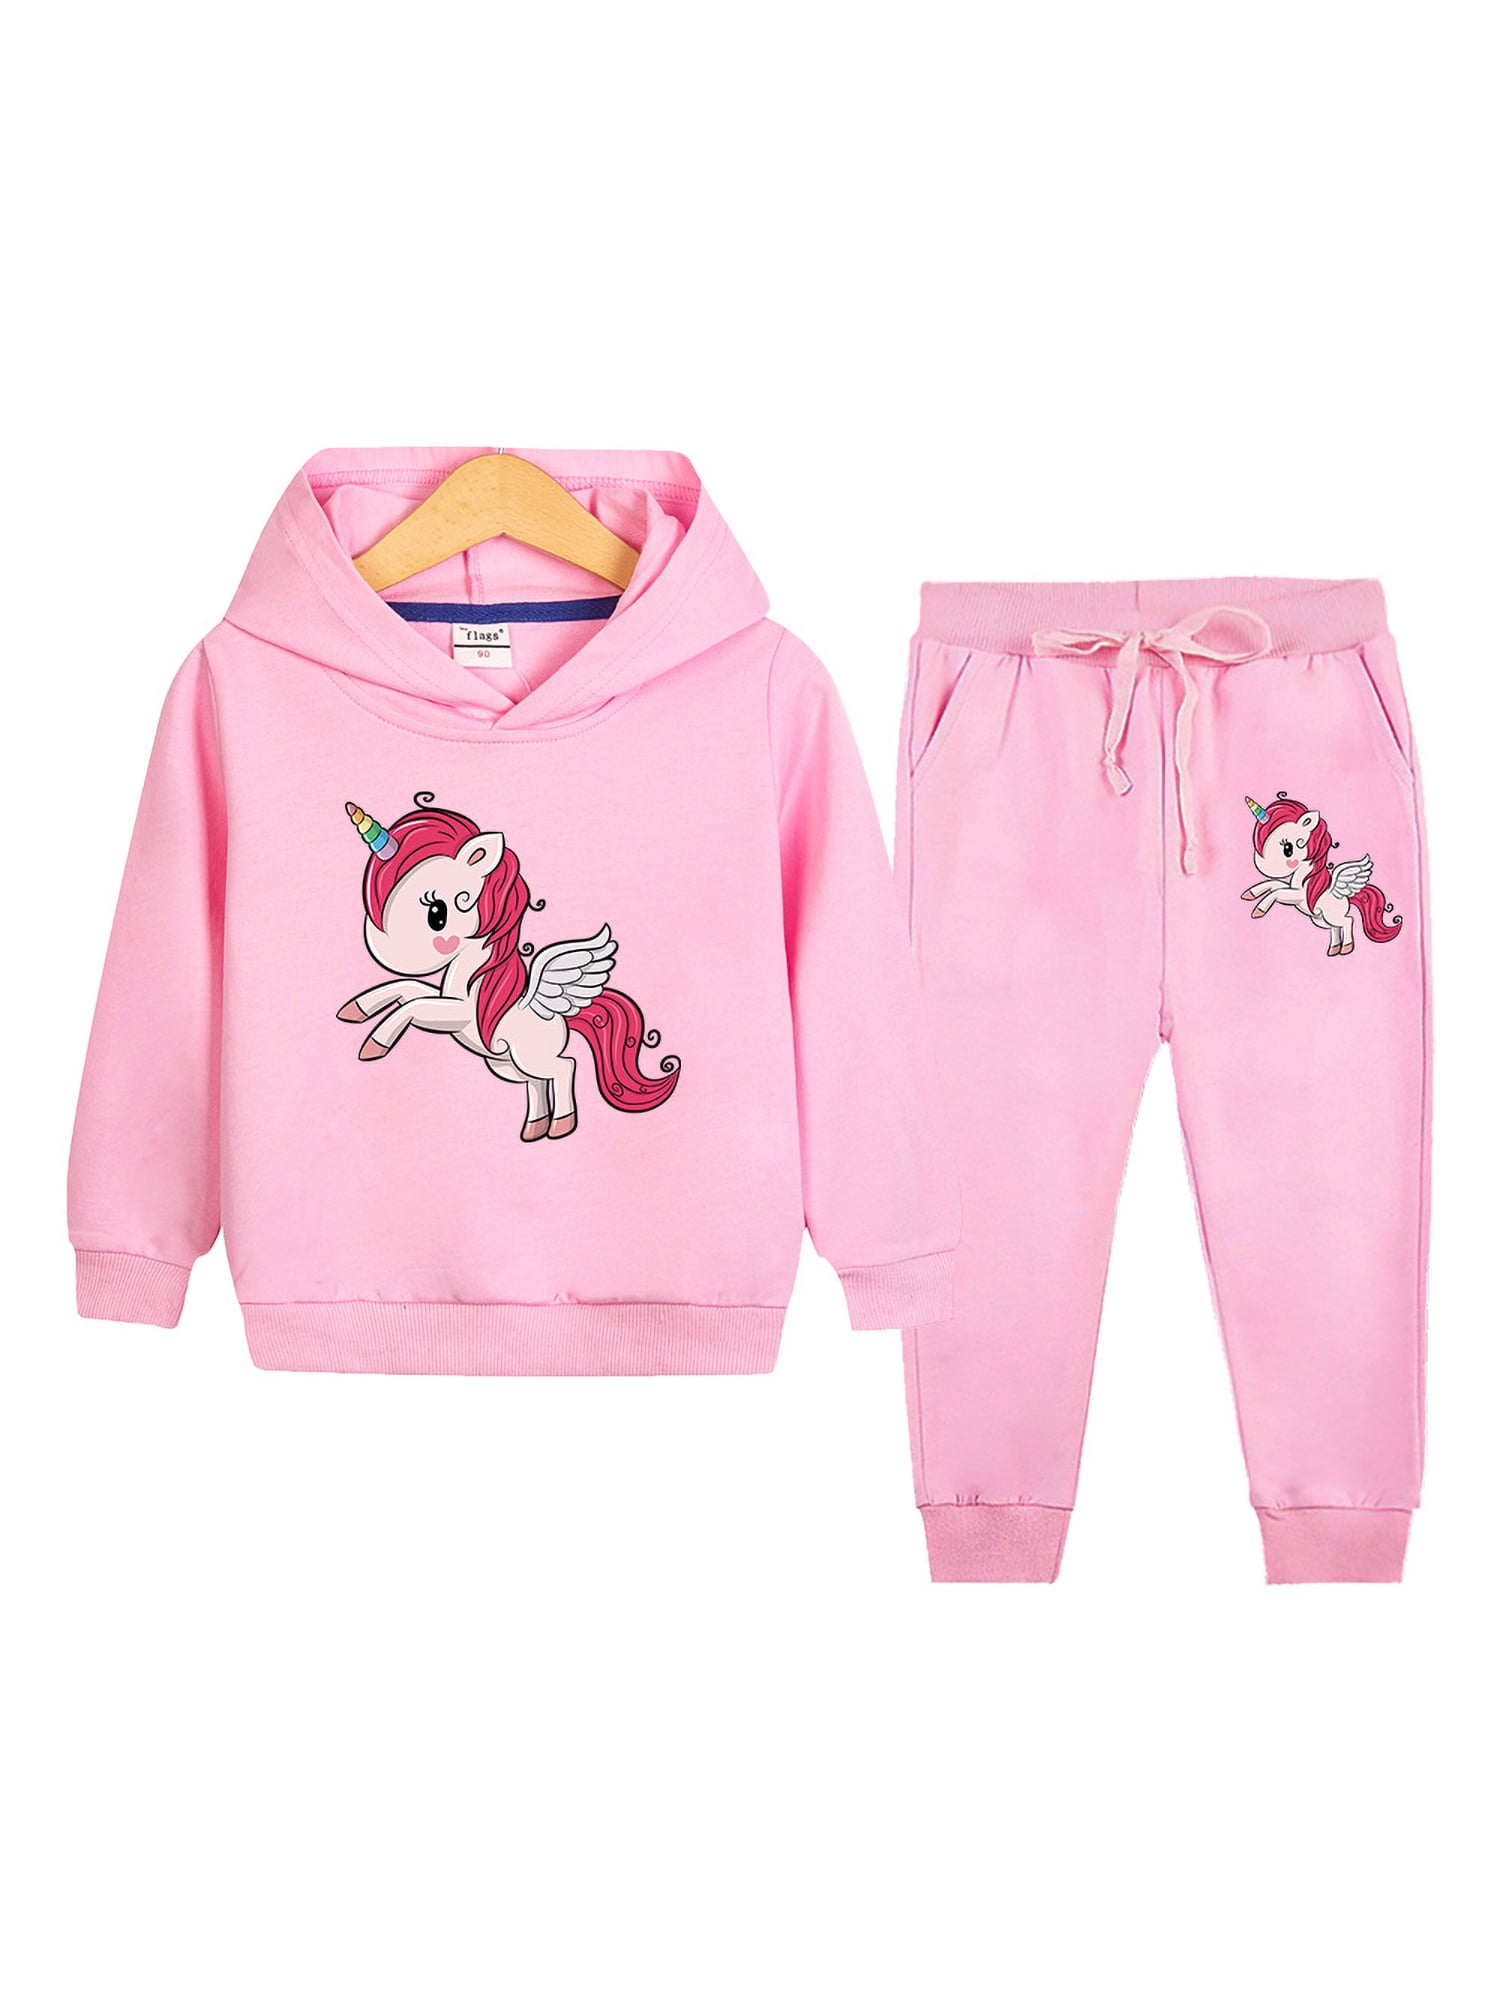 Frontwalk Kid Girl Lace Up Unicorn Print Sweatsuit Hooded Loose